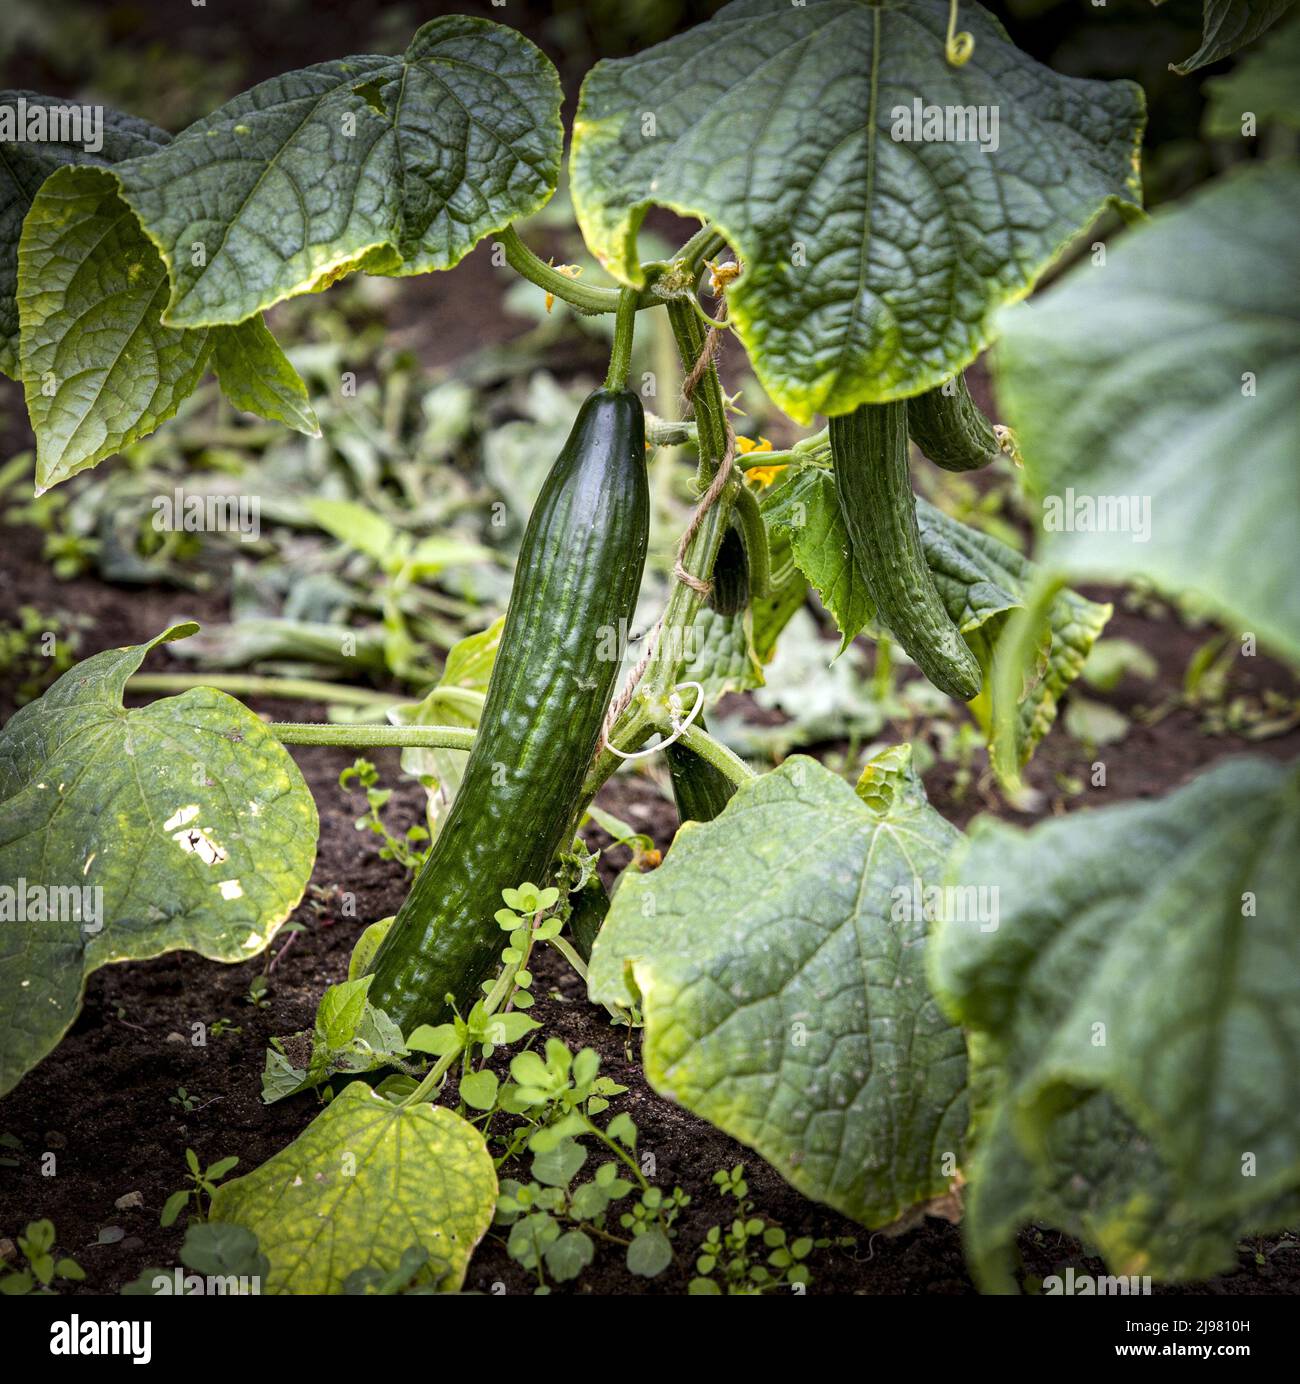 2022-05-21 12:09:56 UTRECHT - A cucumber in urban agriculture initiative Koningshof. There is a growing movement against the current food industry with more and more local products appearing in restaurants and shops. ANP RAMON VAN FLYMEN netherlands out - belgium out Stock Photo